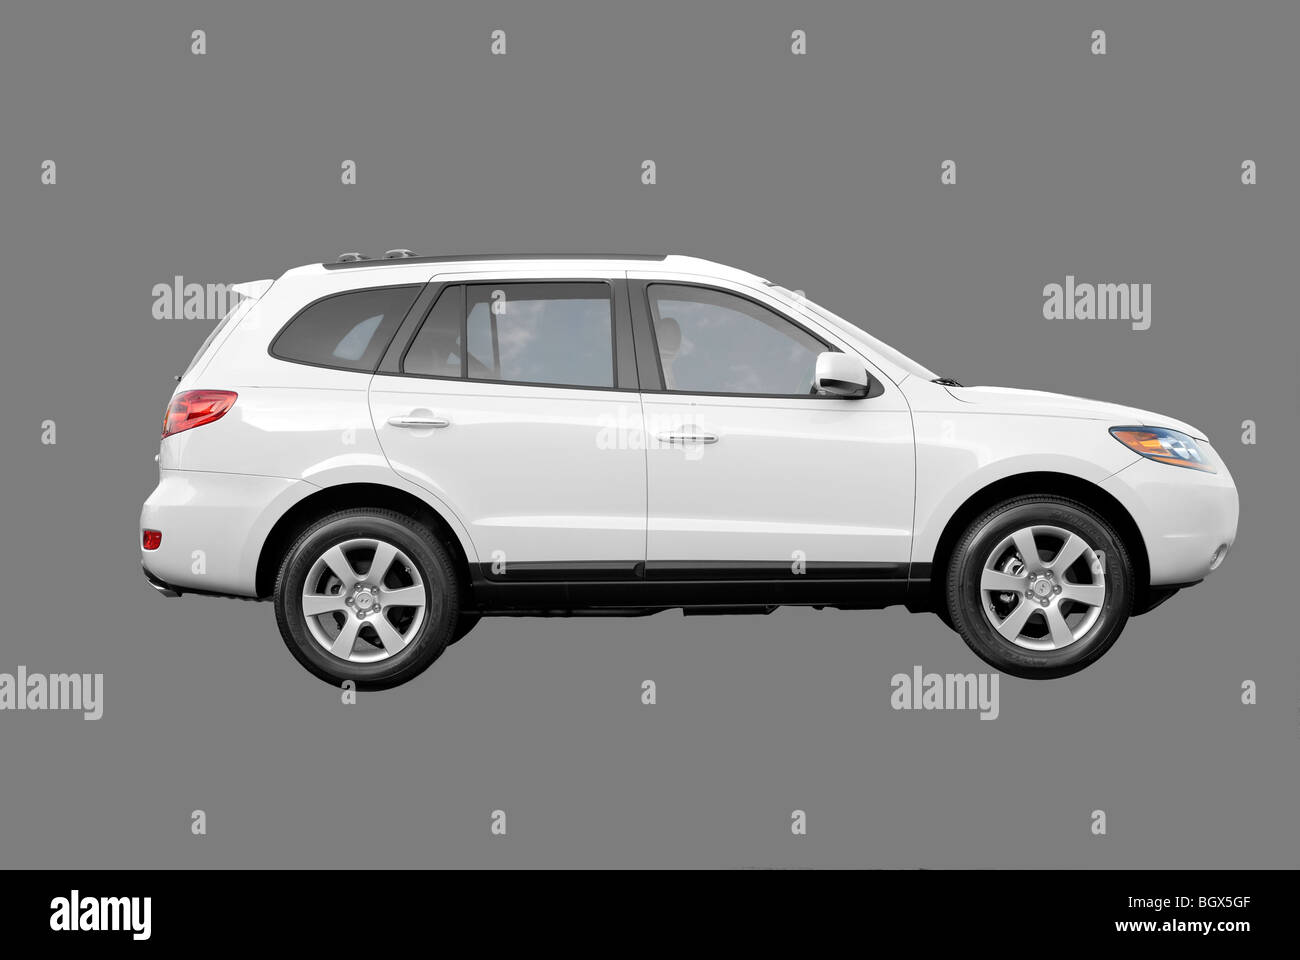 Side view cut-out of a  Hyundai Santa Fe, a mid-size crossover SUV.  EDITORIAL USE ONLY Stock Photo